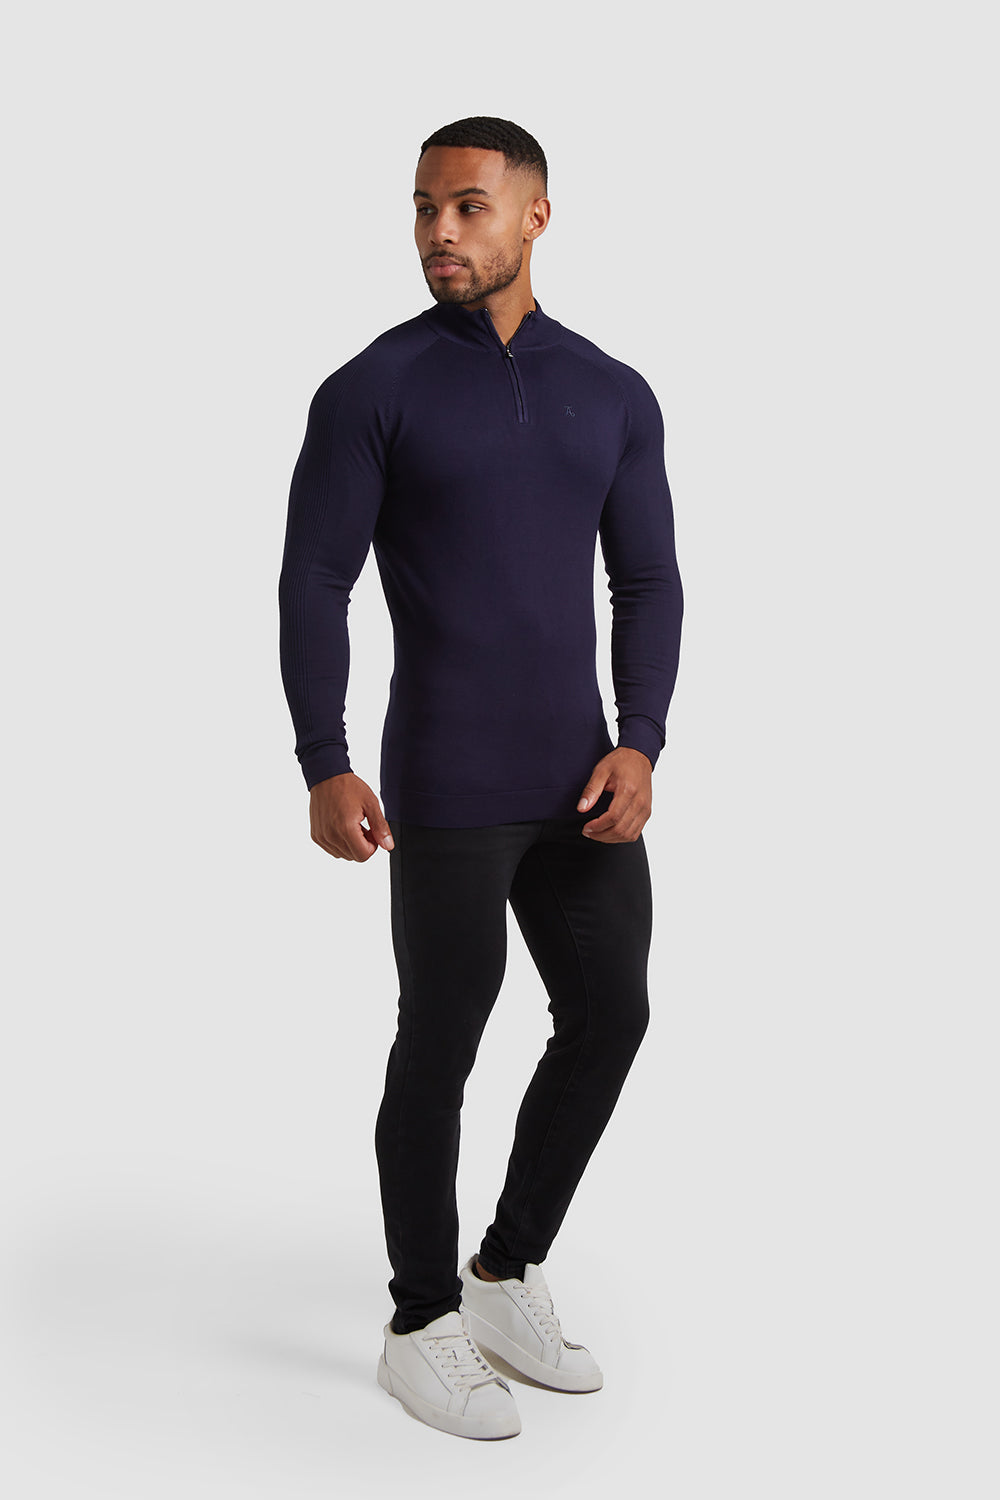 Placement Rib Half Zip Neck (LS) in Navy - TAILORED ATHLETE - ROW